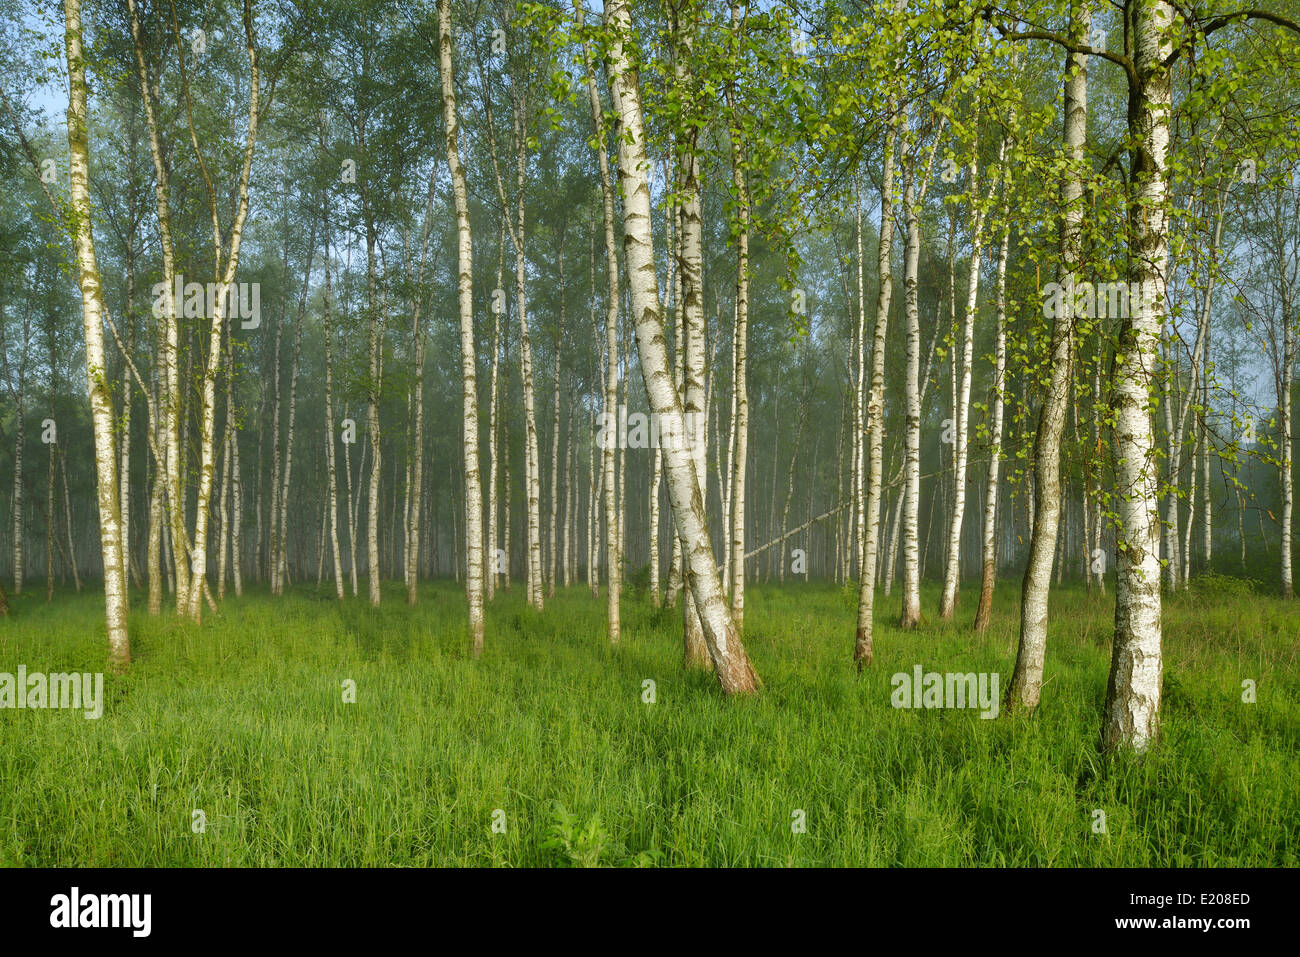 Forest of Downy Birch or White Birch (Betula pubescens) in